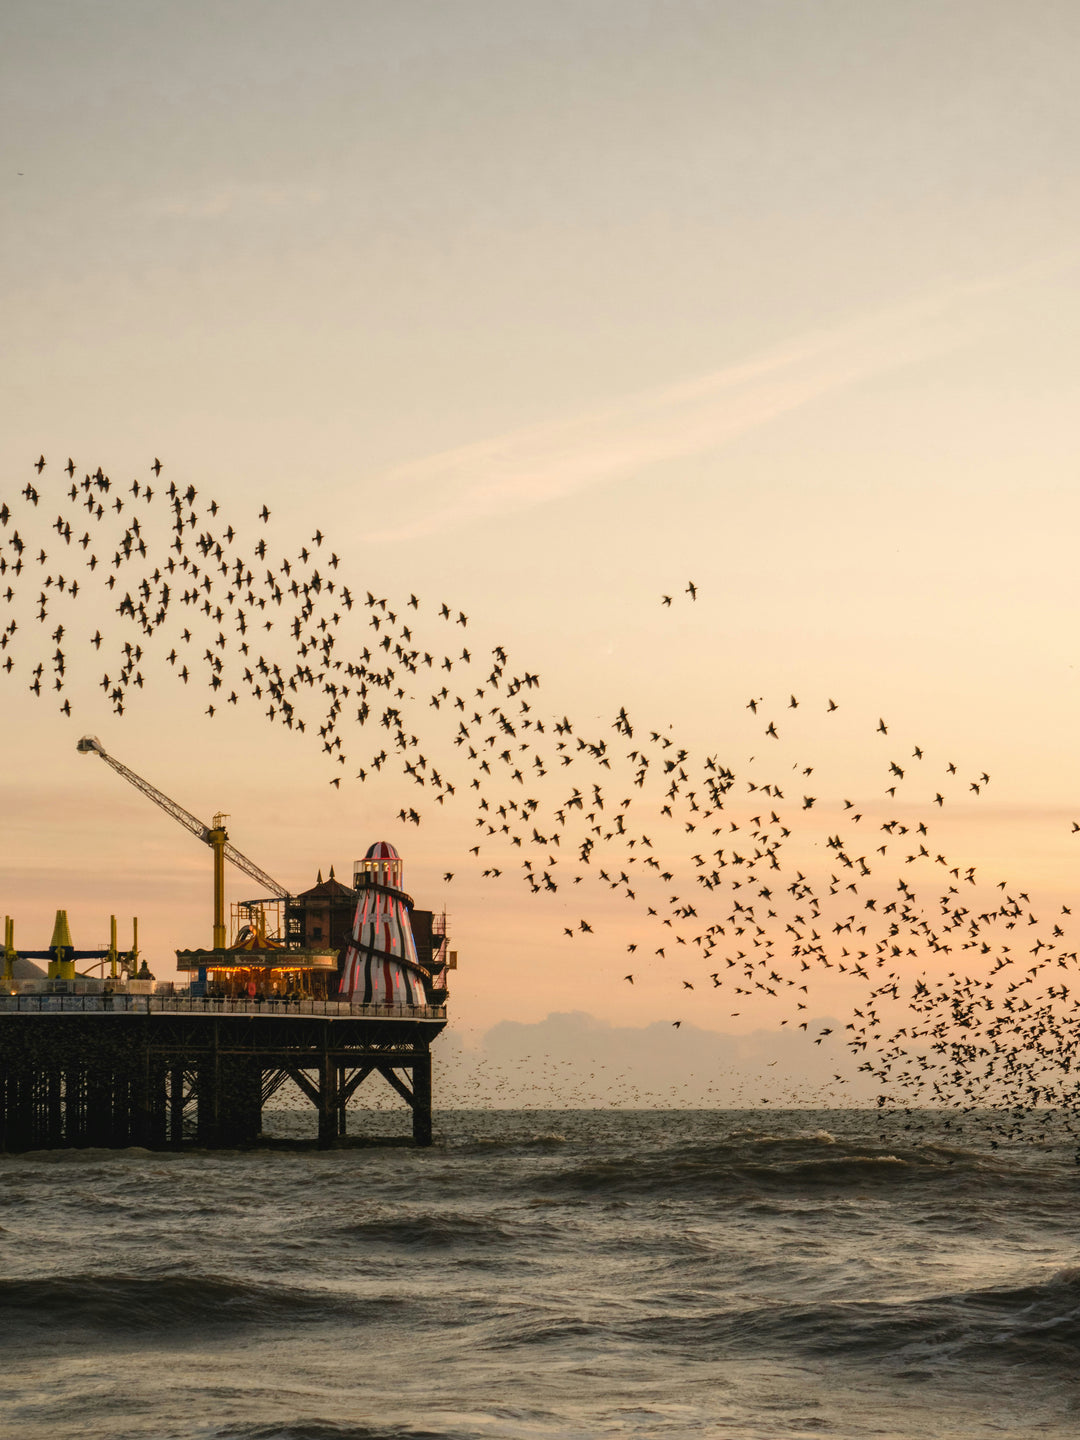 Murmurations over Brighton pier at sunset Photo Print - Canvas - Framed Photo Print - Hampshire Prints